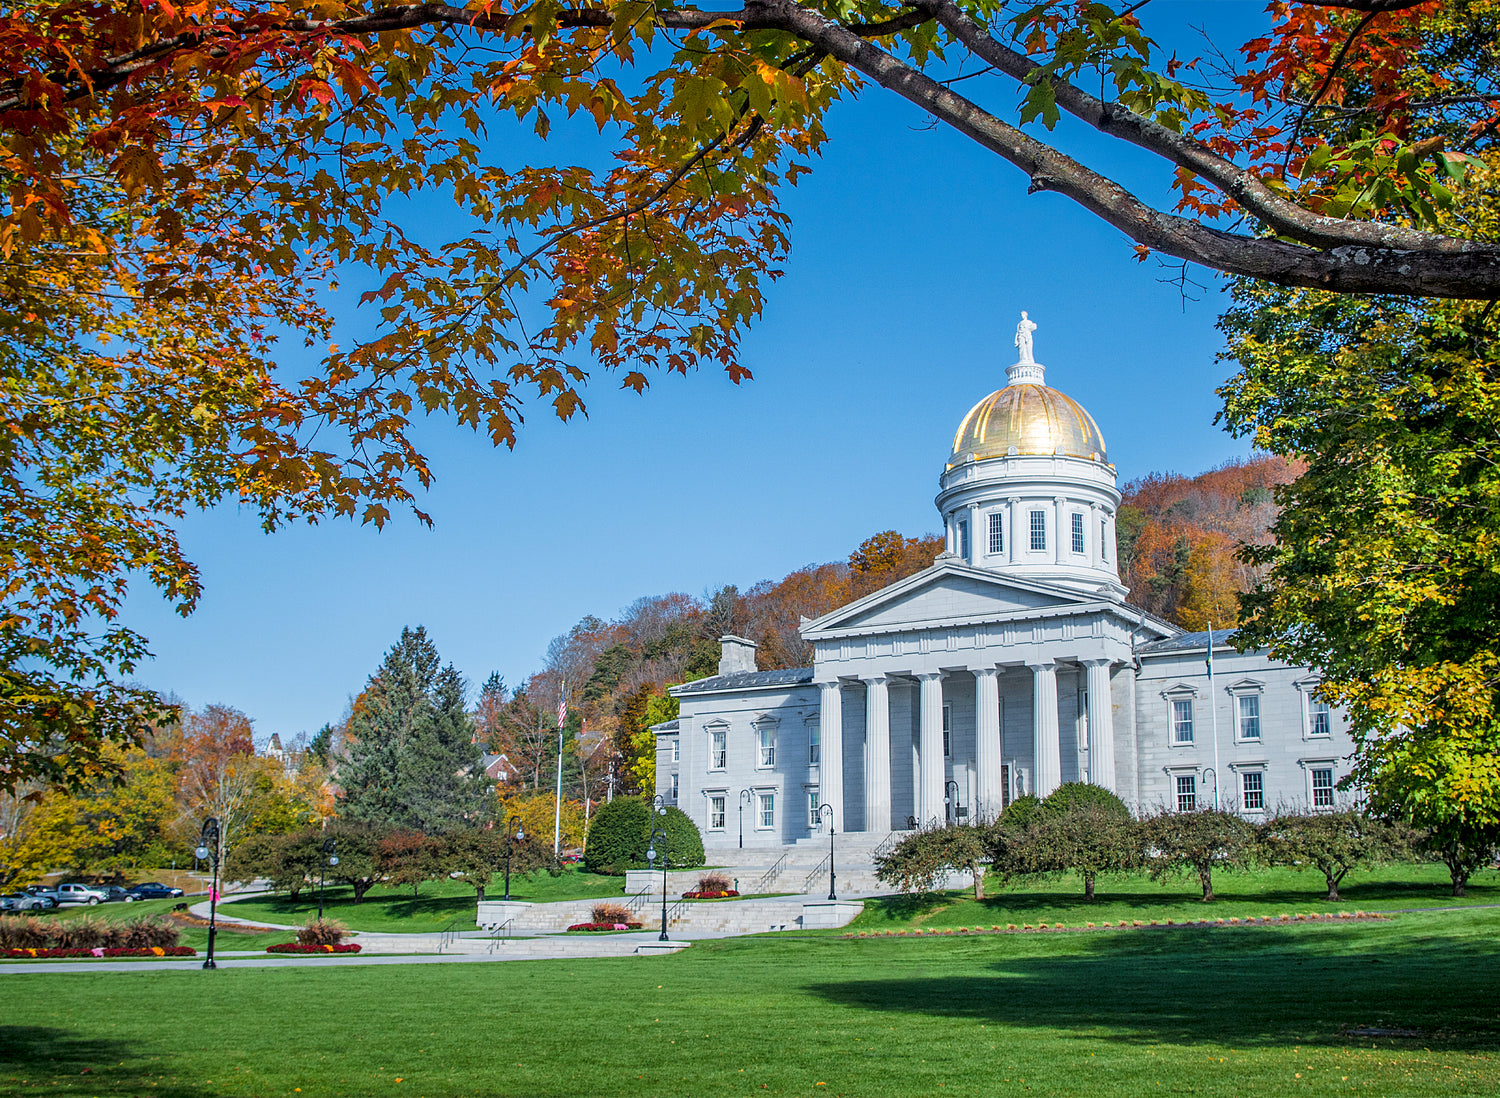 Vermont Kicks Off Their First Day Of Recreational Cannabis Sales To High Demand